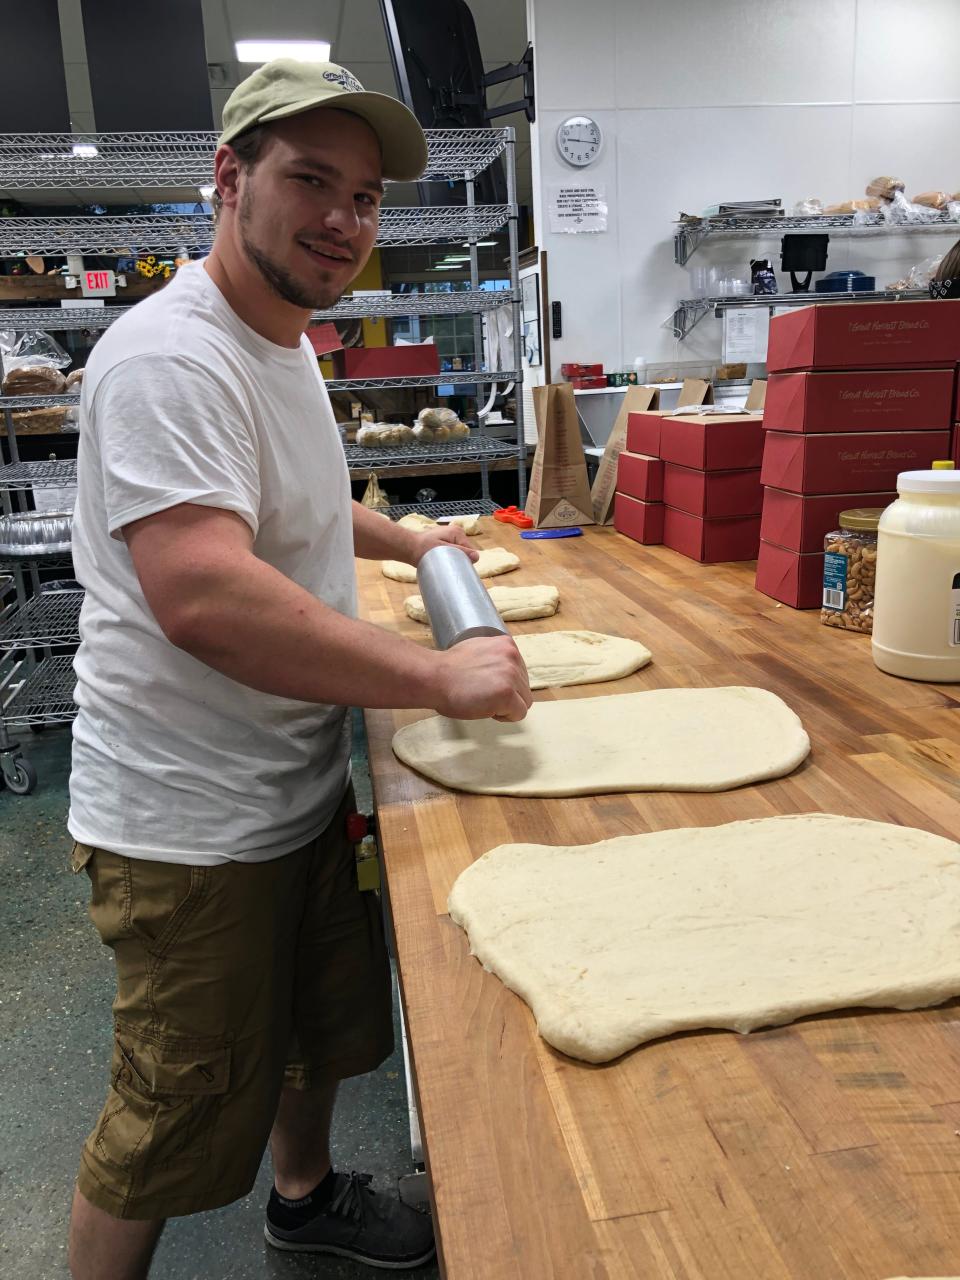 Nick Puski, Great Harvest's head bread baker, rolls out dough for cinnamon rolls at the bakery and café in downtown Ames.